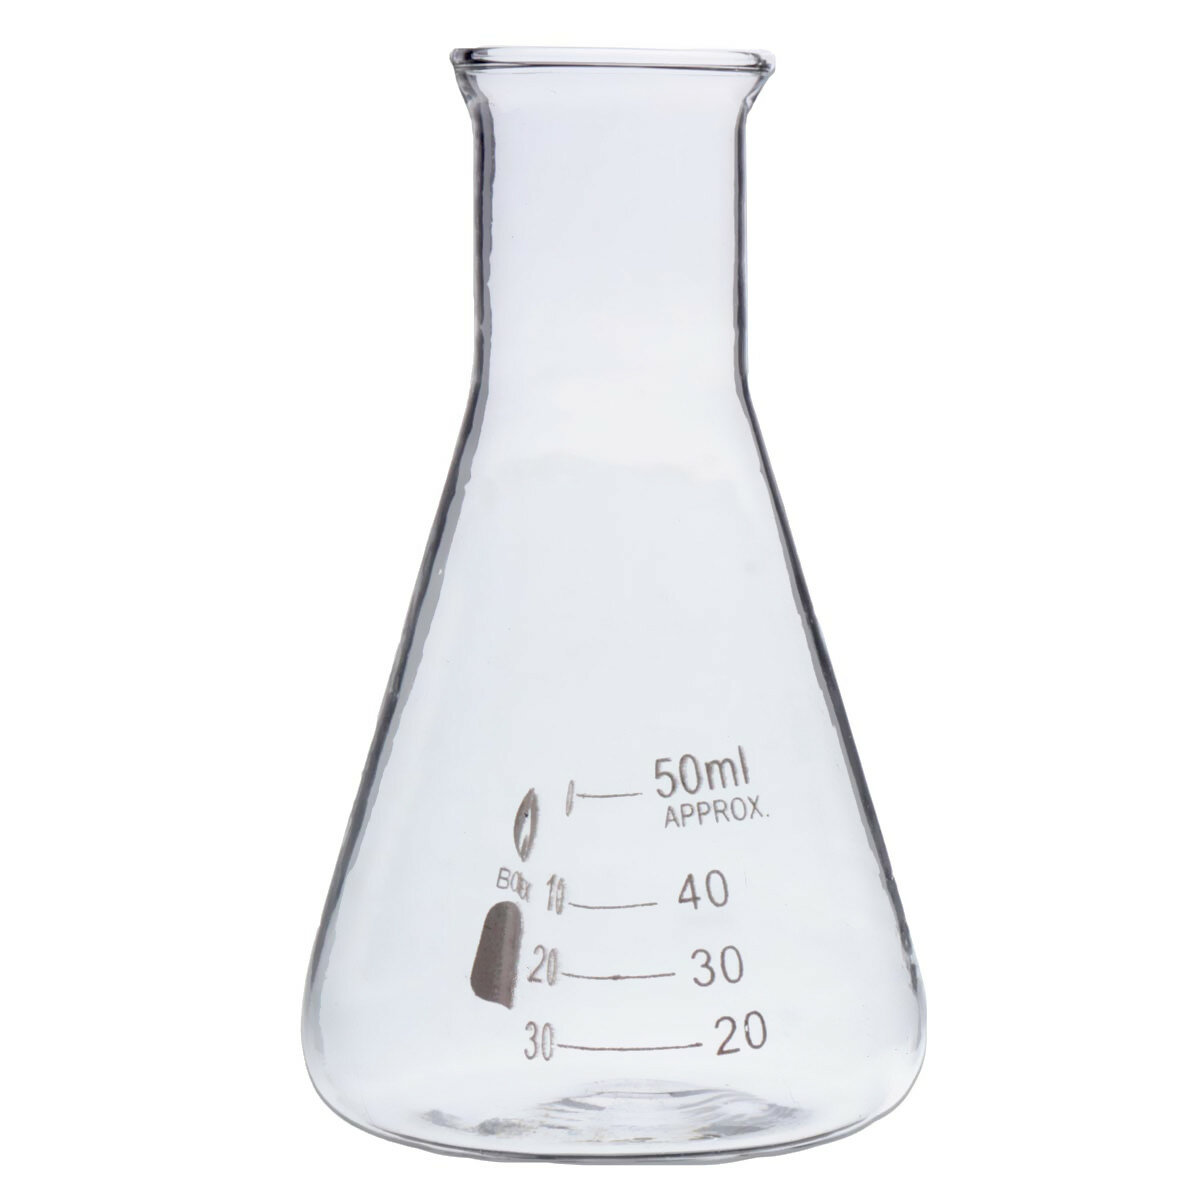 

50ml Graduated Narrow Mouth Glass Erlenmeyer Flask Conical Flask 29/40 Ground Joints